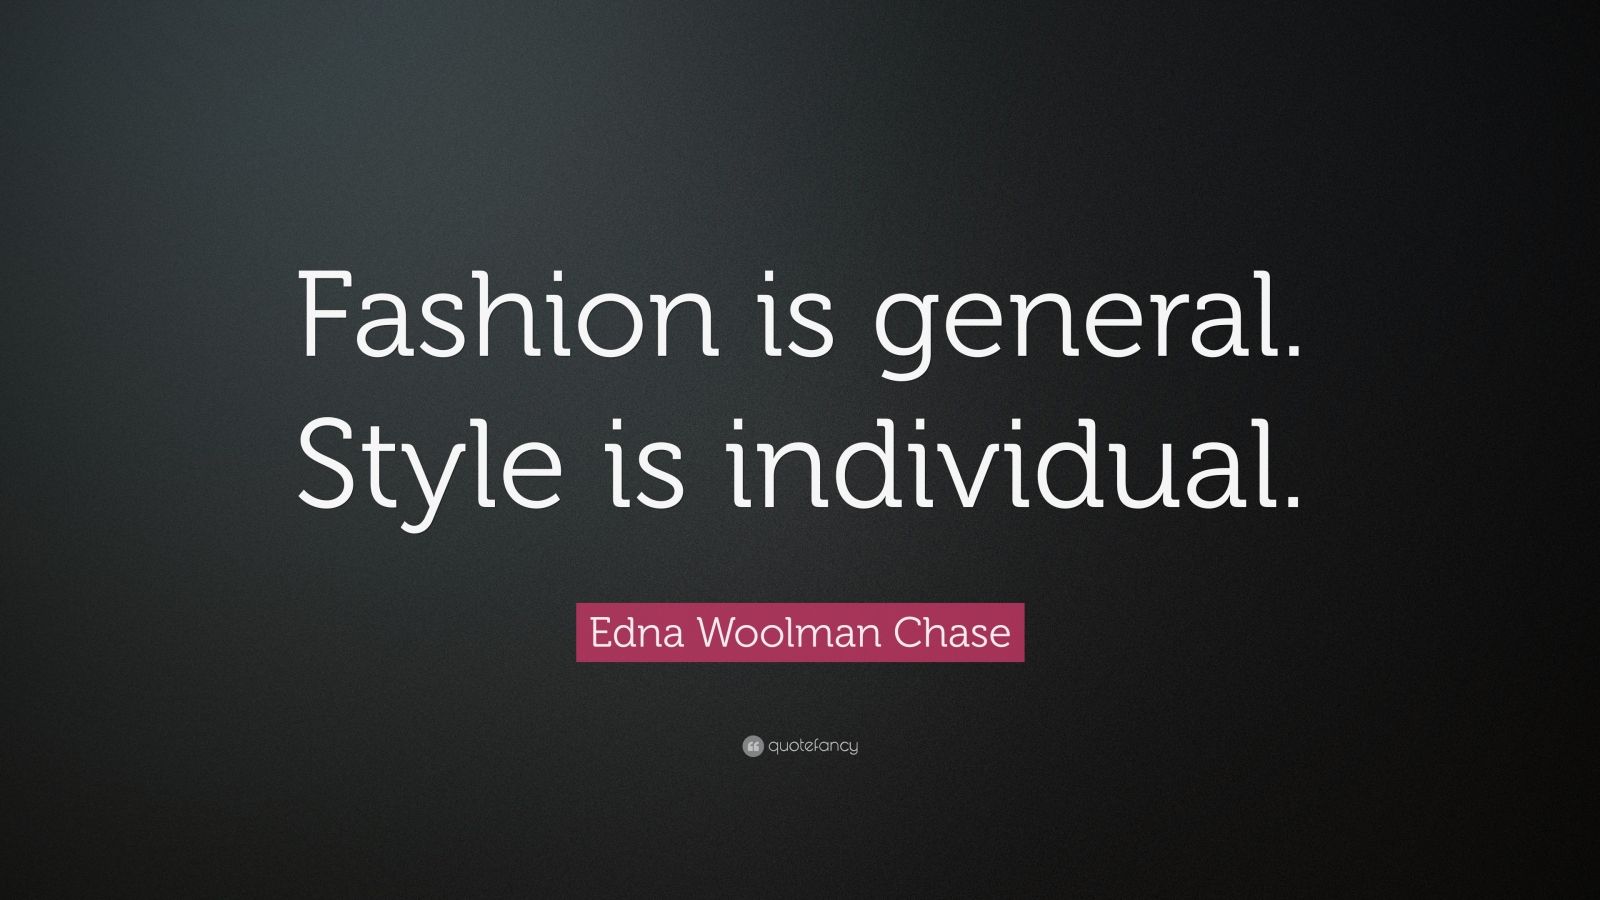 Edna Woolman Chase Quote: “Fashion is general. Style is individual.”